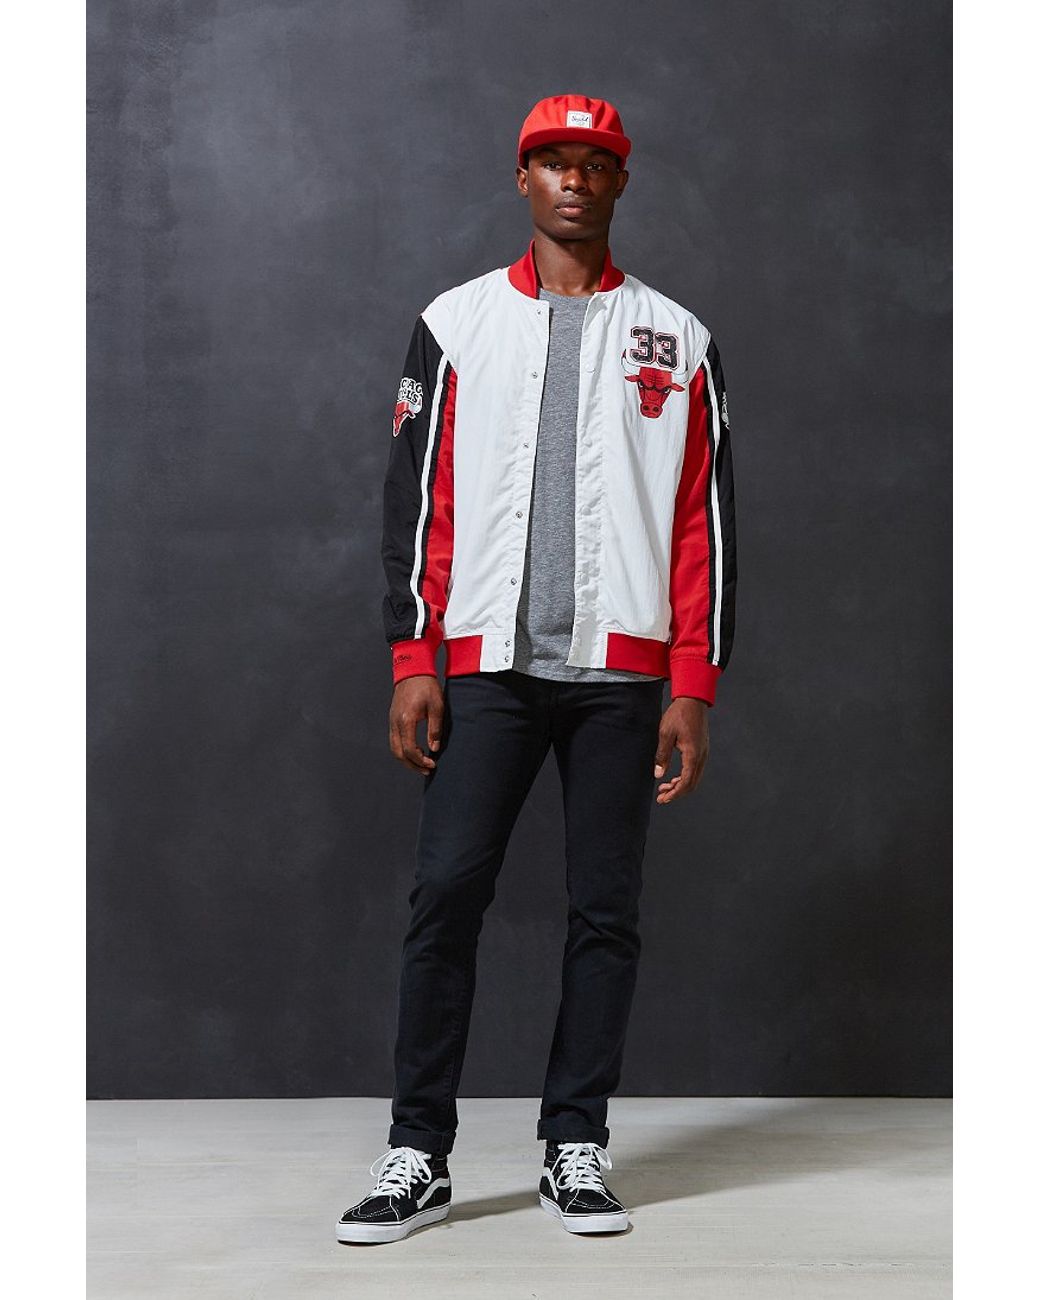 Mitchell & Ness Scottie Pippen Warmup Jacket in Red for Men